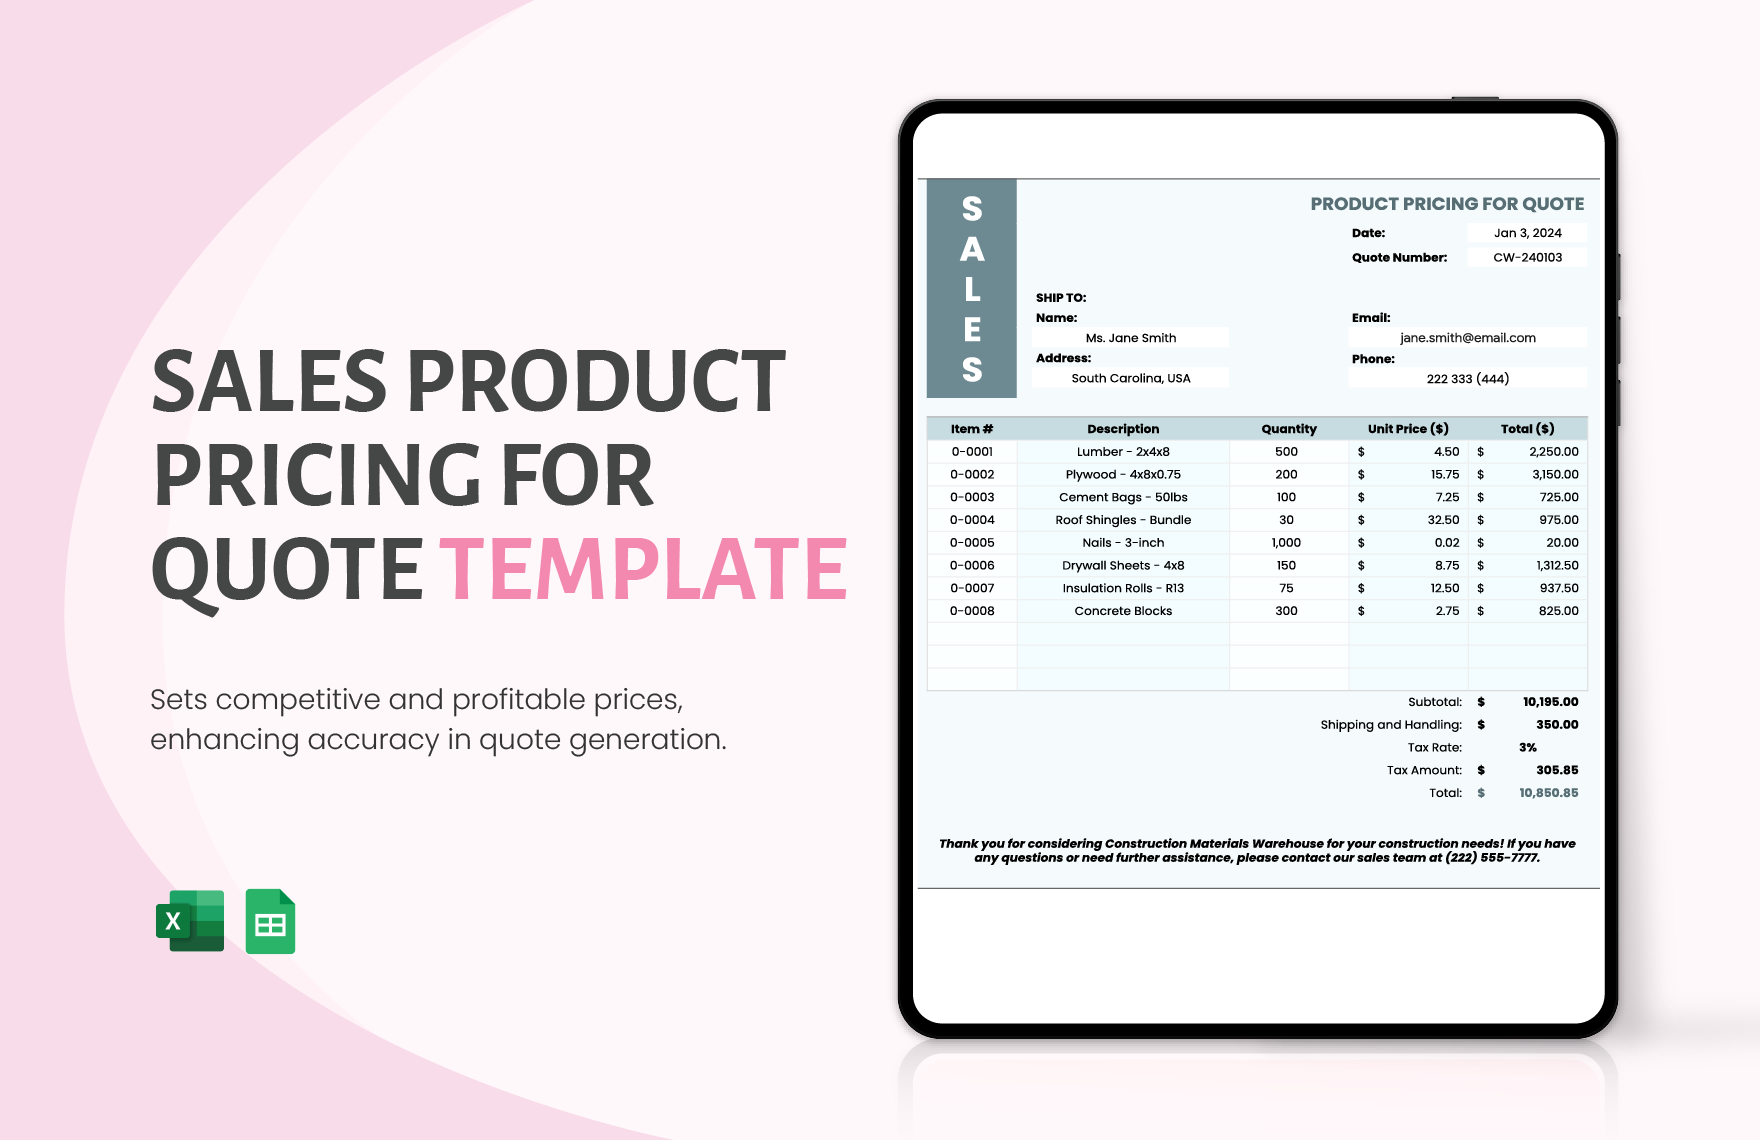 Sales Product Pricing for Quote Template